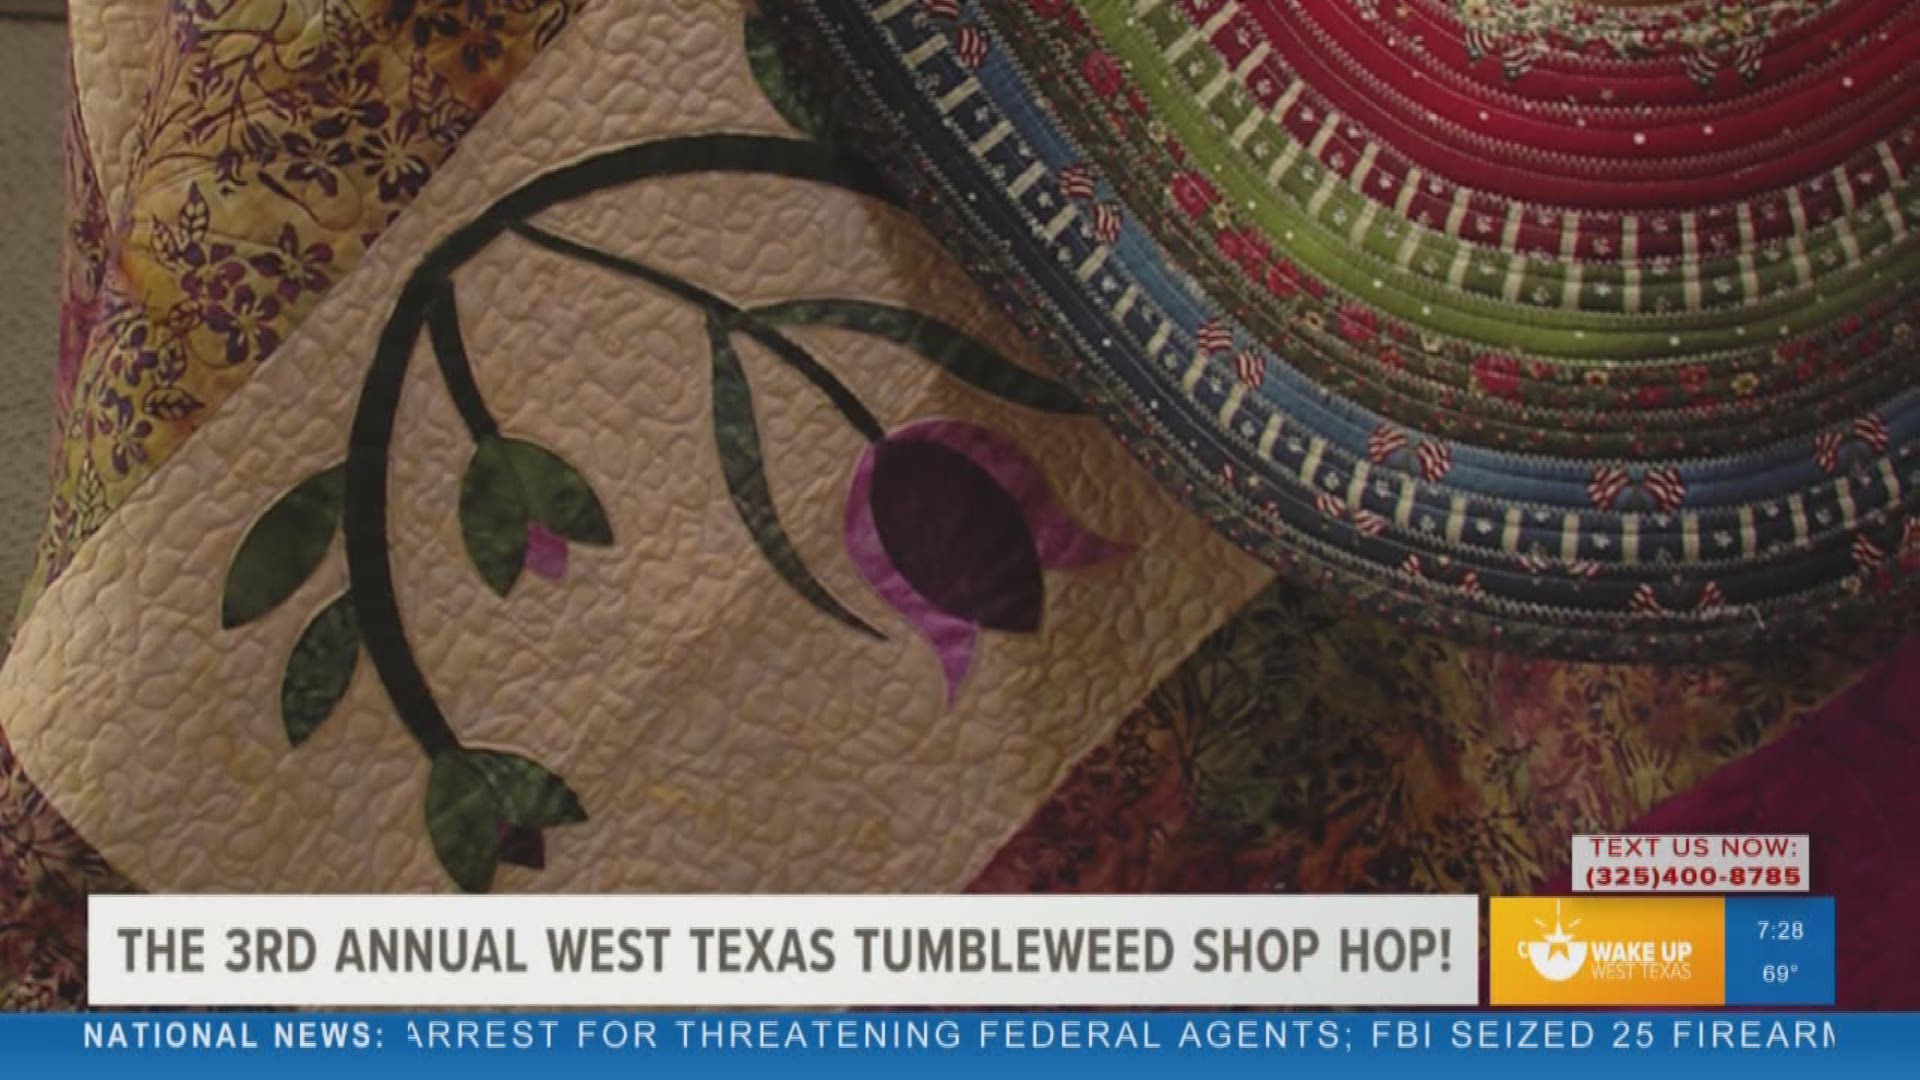 Our Malik Mingo spoke with one of the co-organizers of the West Texas Tumbleweed Shop Hop about what participants can expect on August 16-17 at the McNease Convention Center.